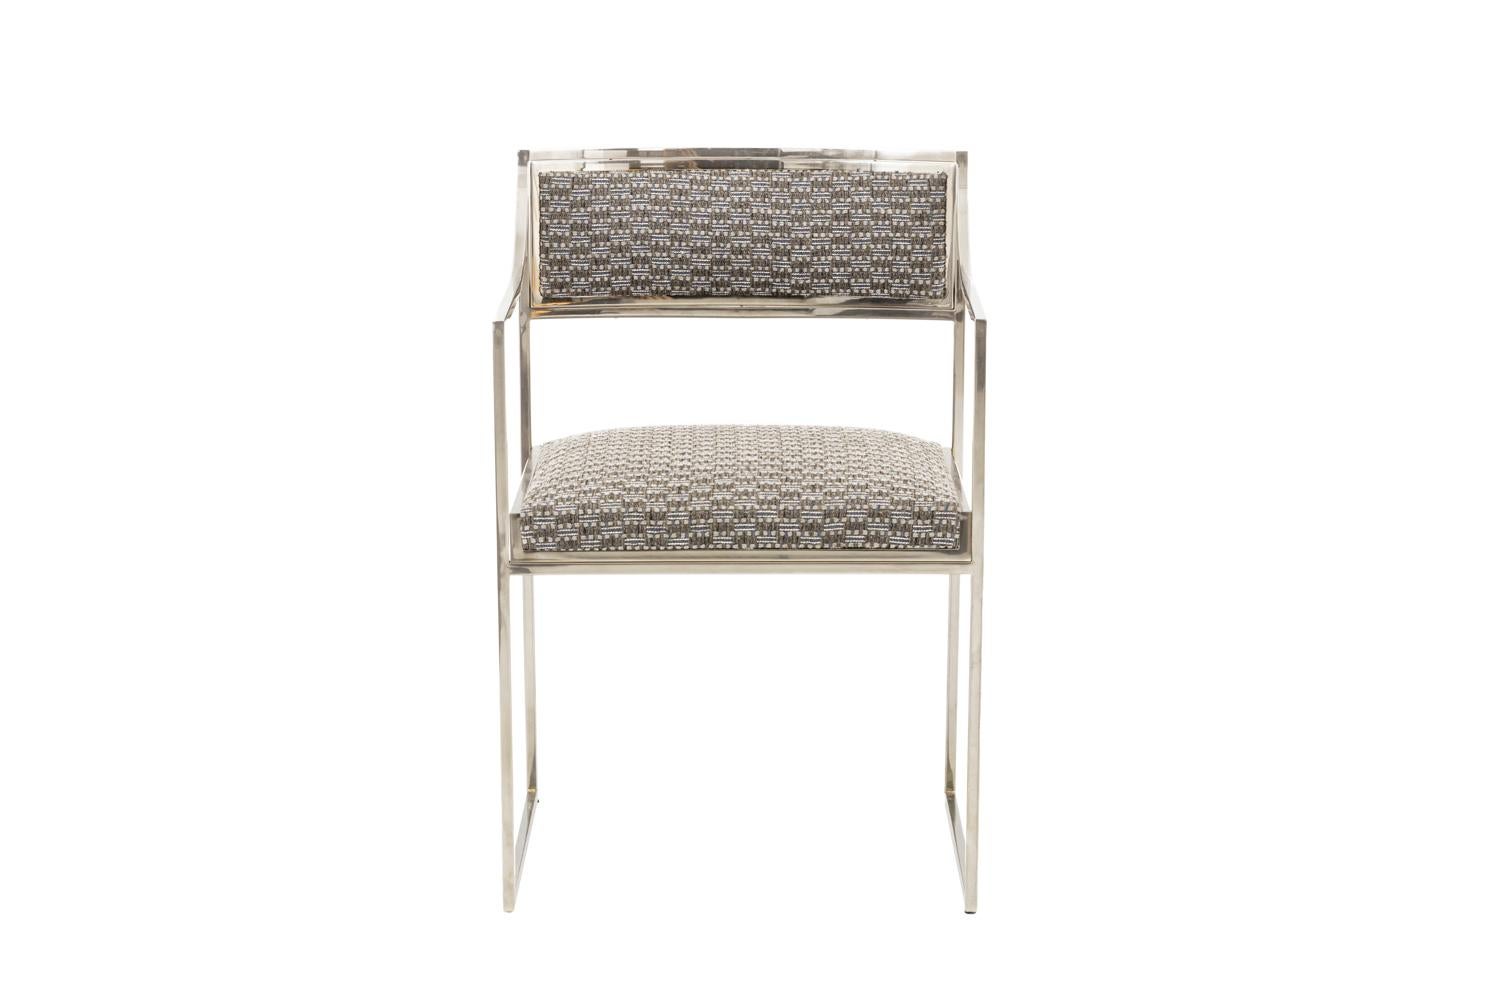 Willy Rizzo, attributed to.
Chromed metal armchair standing on two rectangular legs composed by squared metal sticks going up to form sloping arms.
Rectangular back and seat with a double frame.

Trim entirely reupholstered by our work shops with a